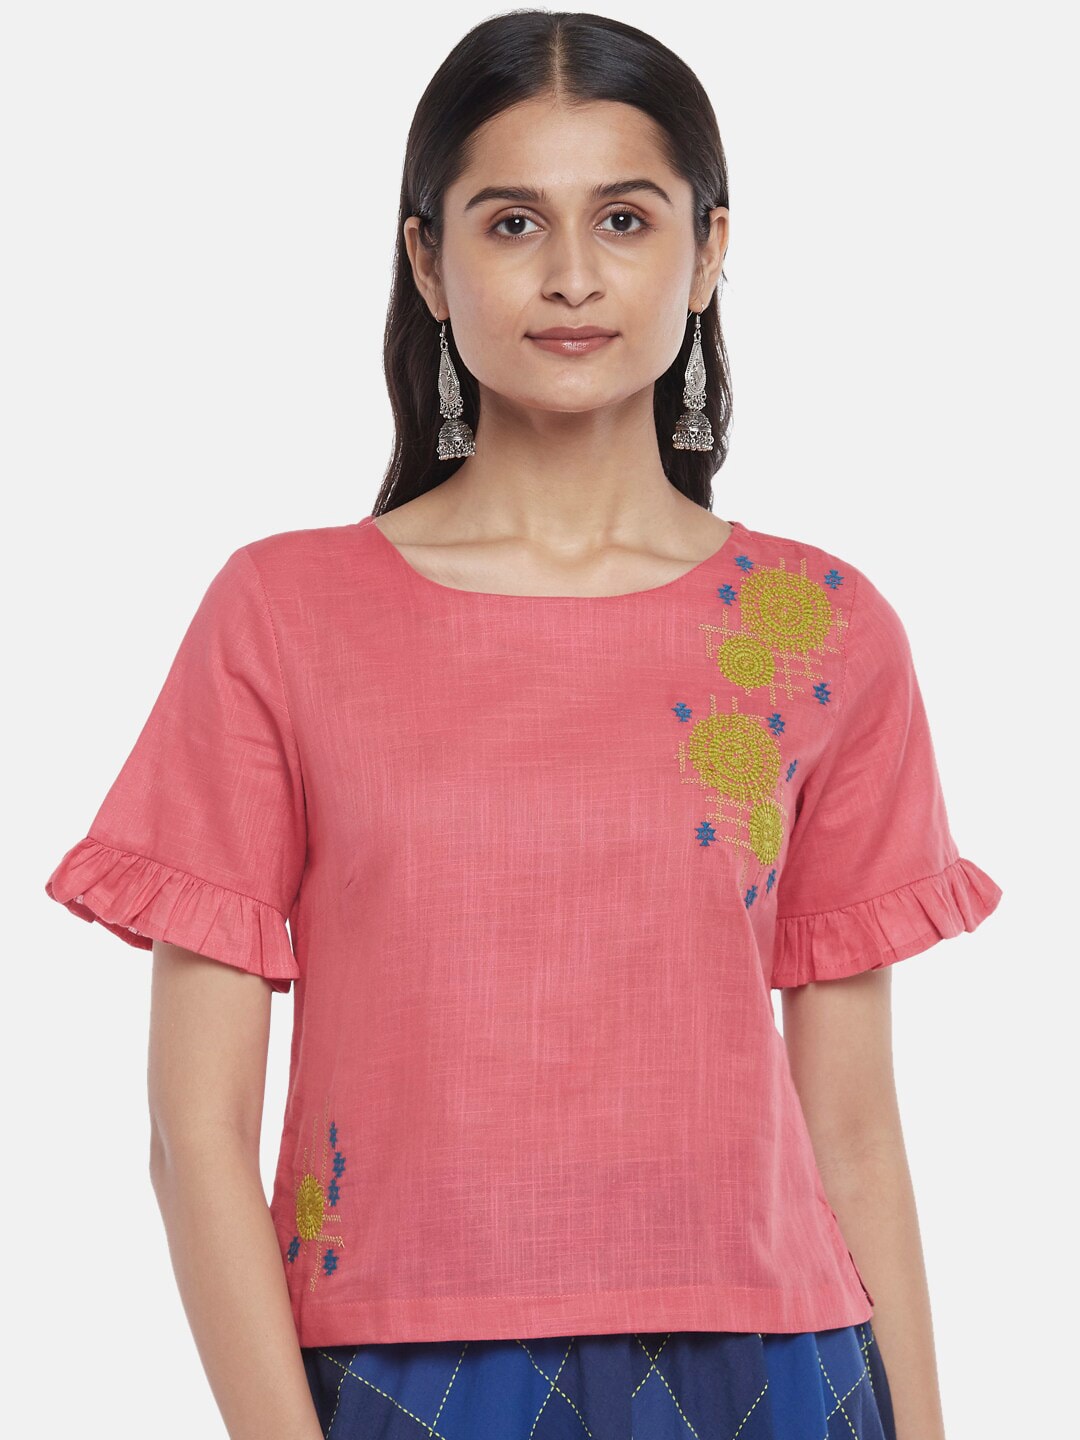 AKKRITI BY PANTALOONS Women Pink & Green Geometric Embroidered Top Price in India